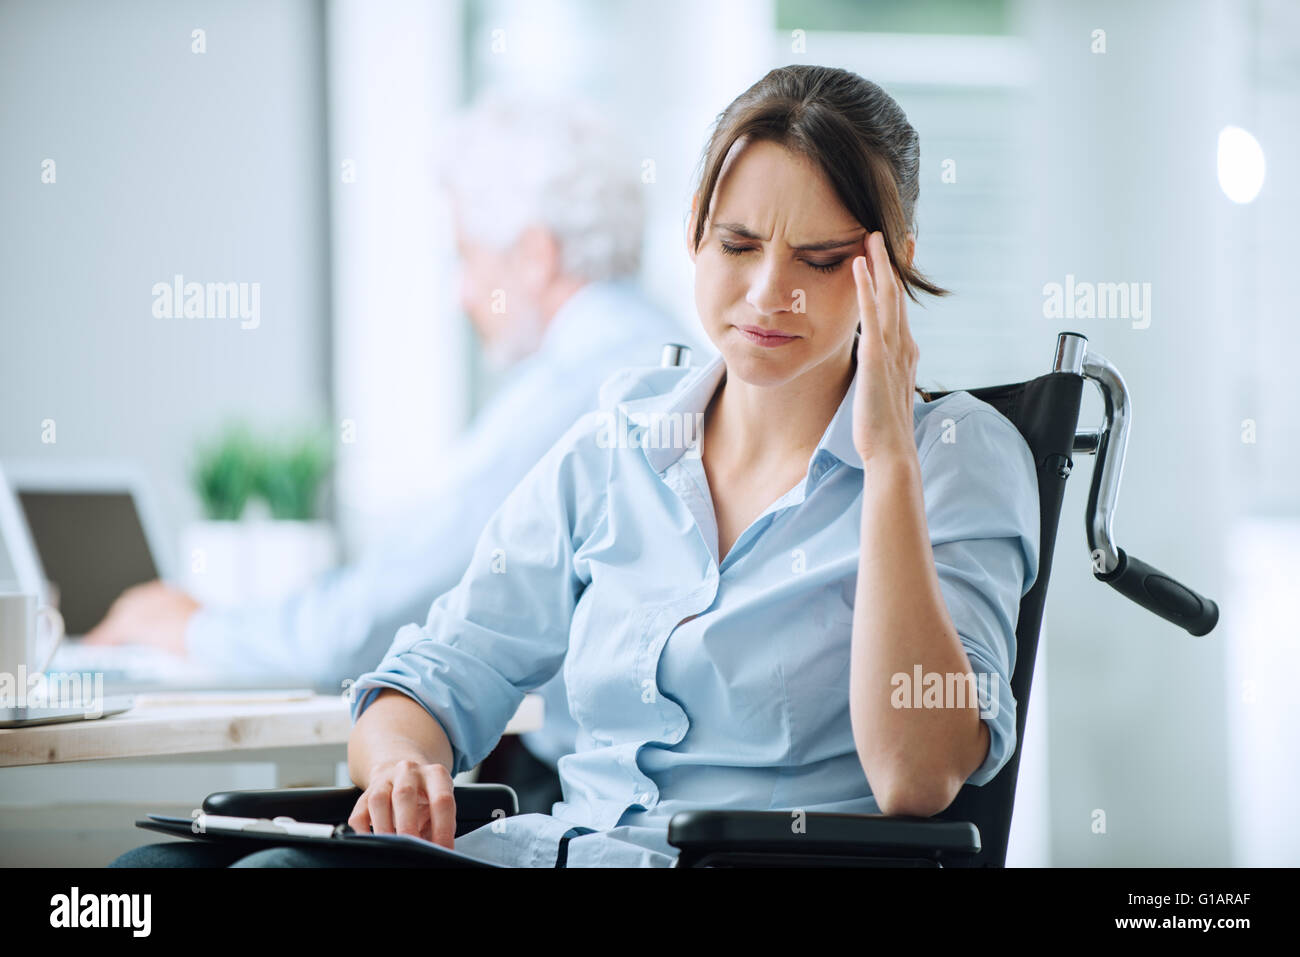 Disabled business woman in wheelchair at office having an headache touching her temples Stock Photo